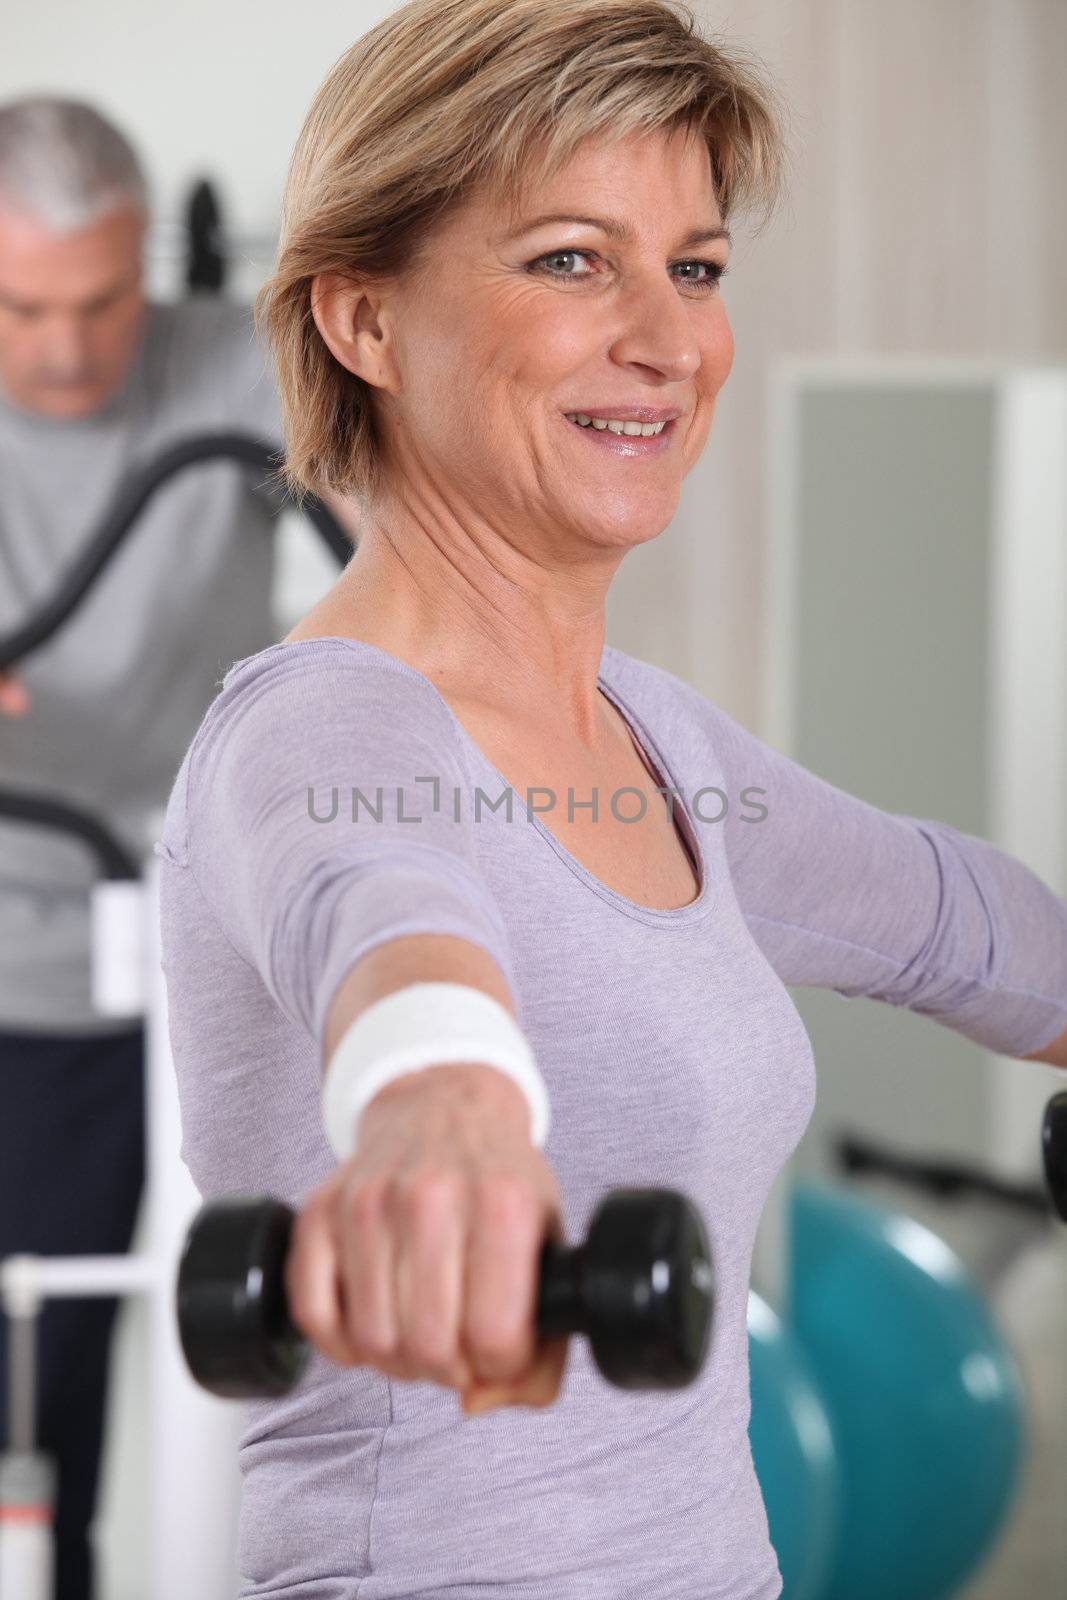 Older people in the gym by phovoir